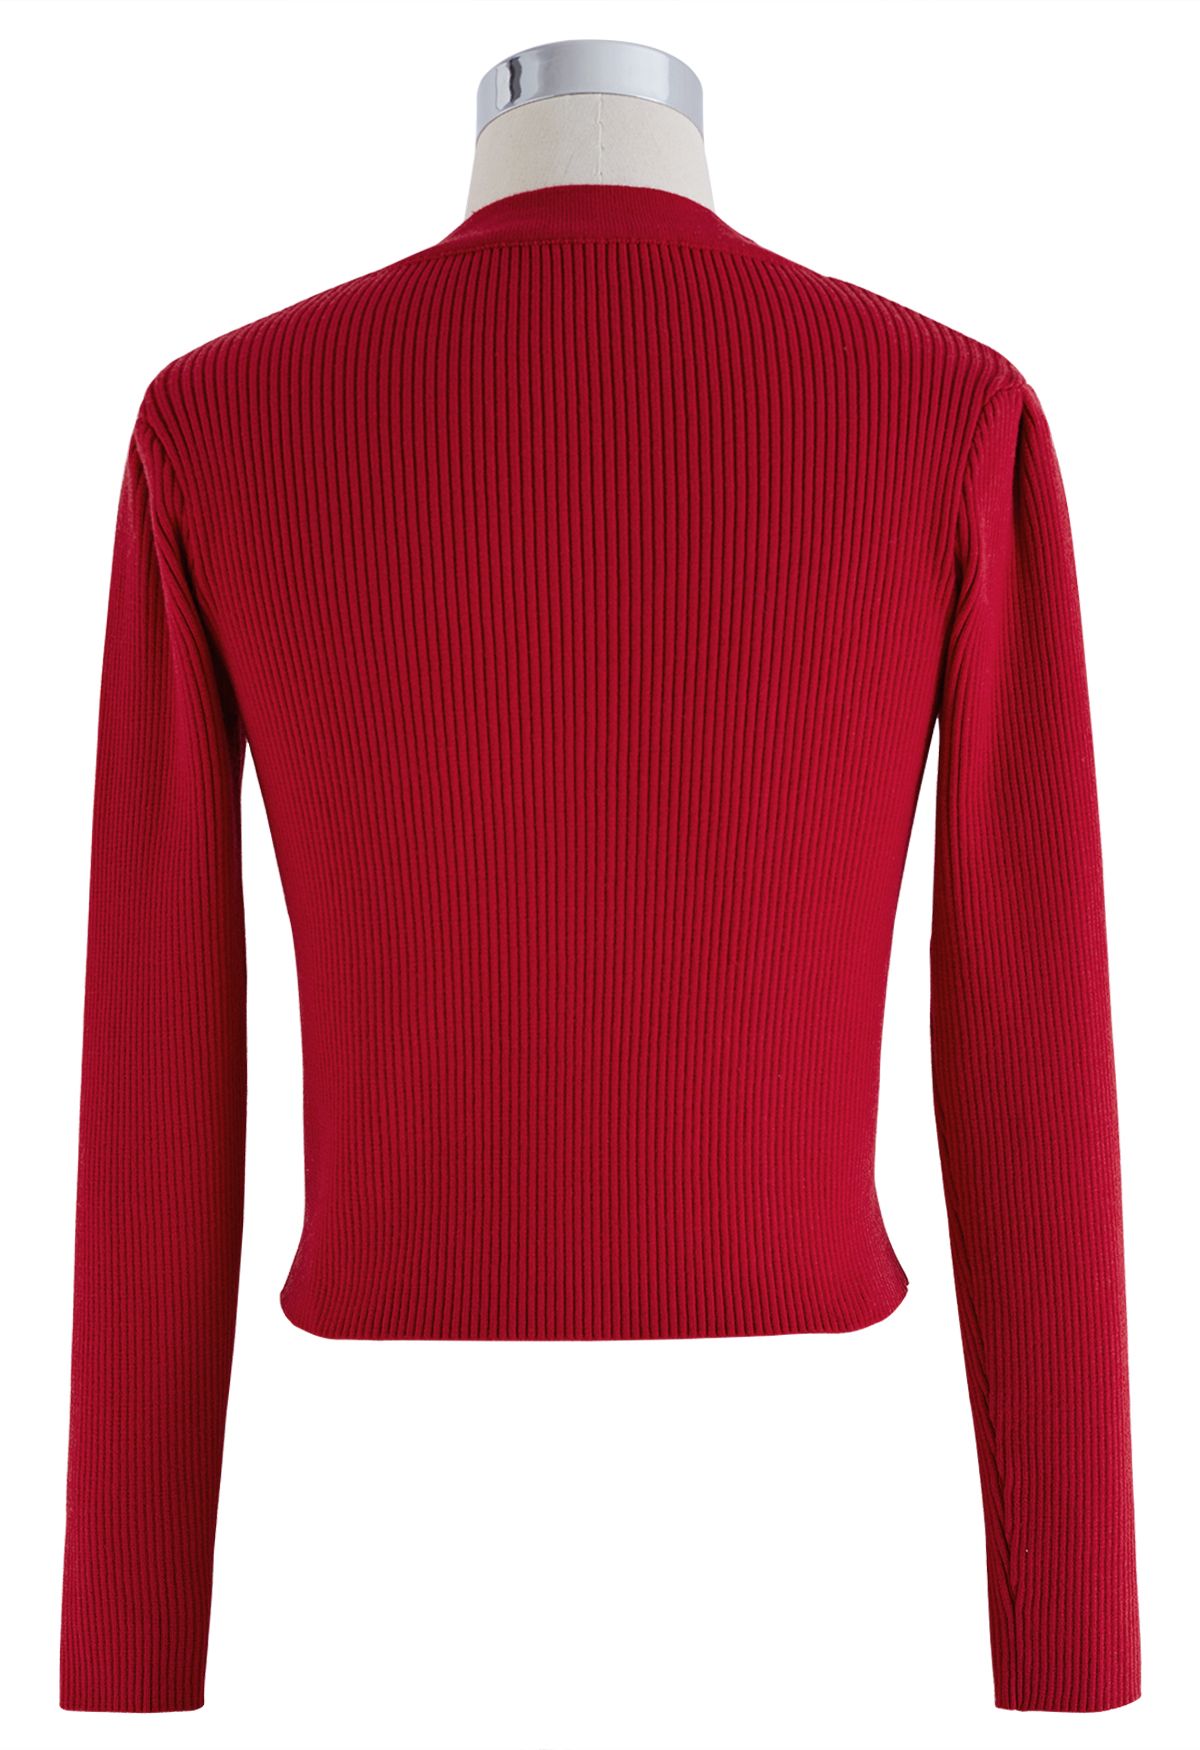 Heart-Shape Buttons Square Neck Knit Top in Red